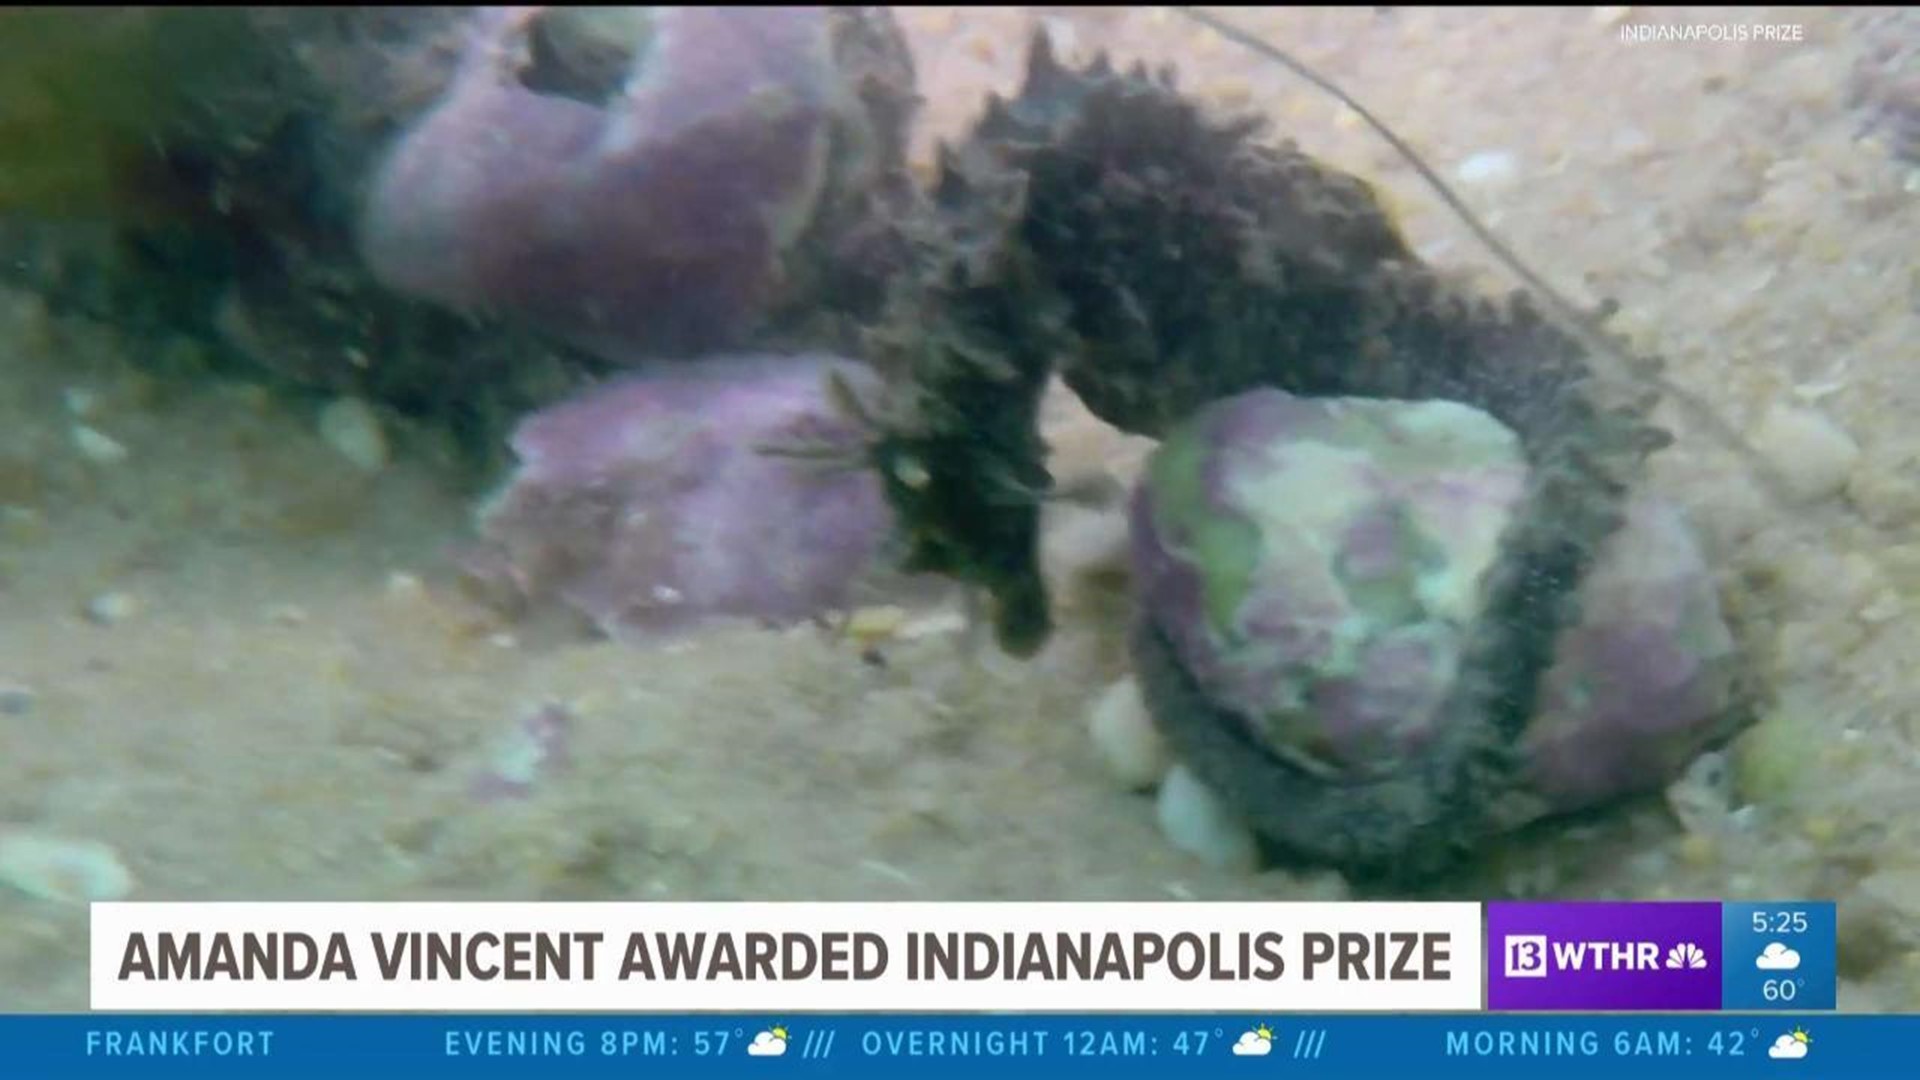 Indianapolis Prize winner announced